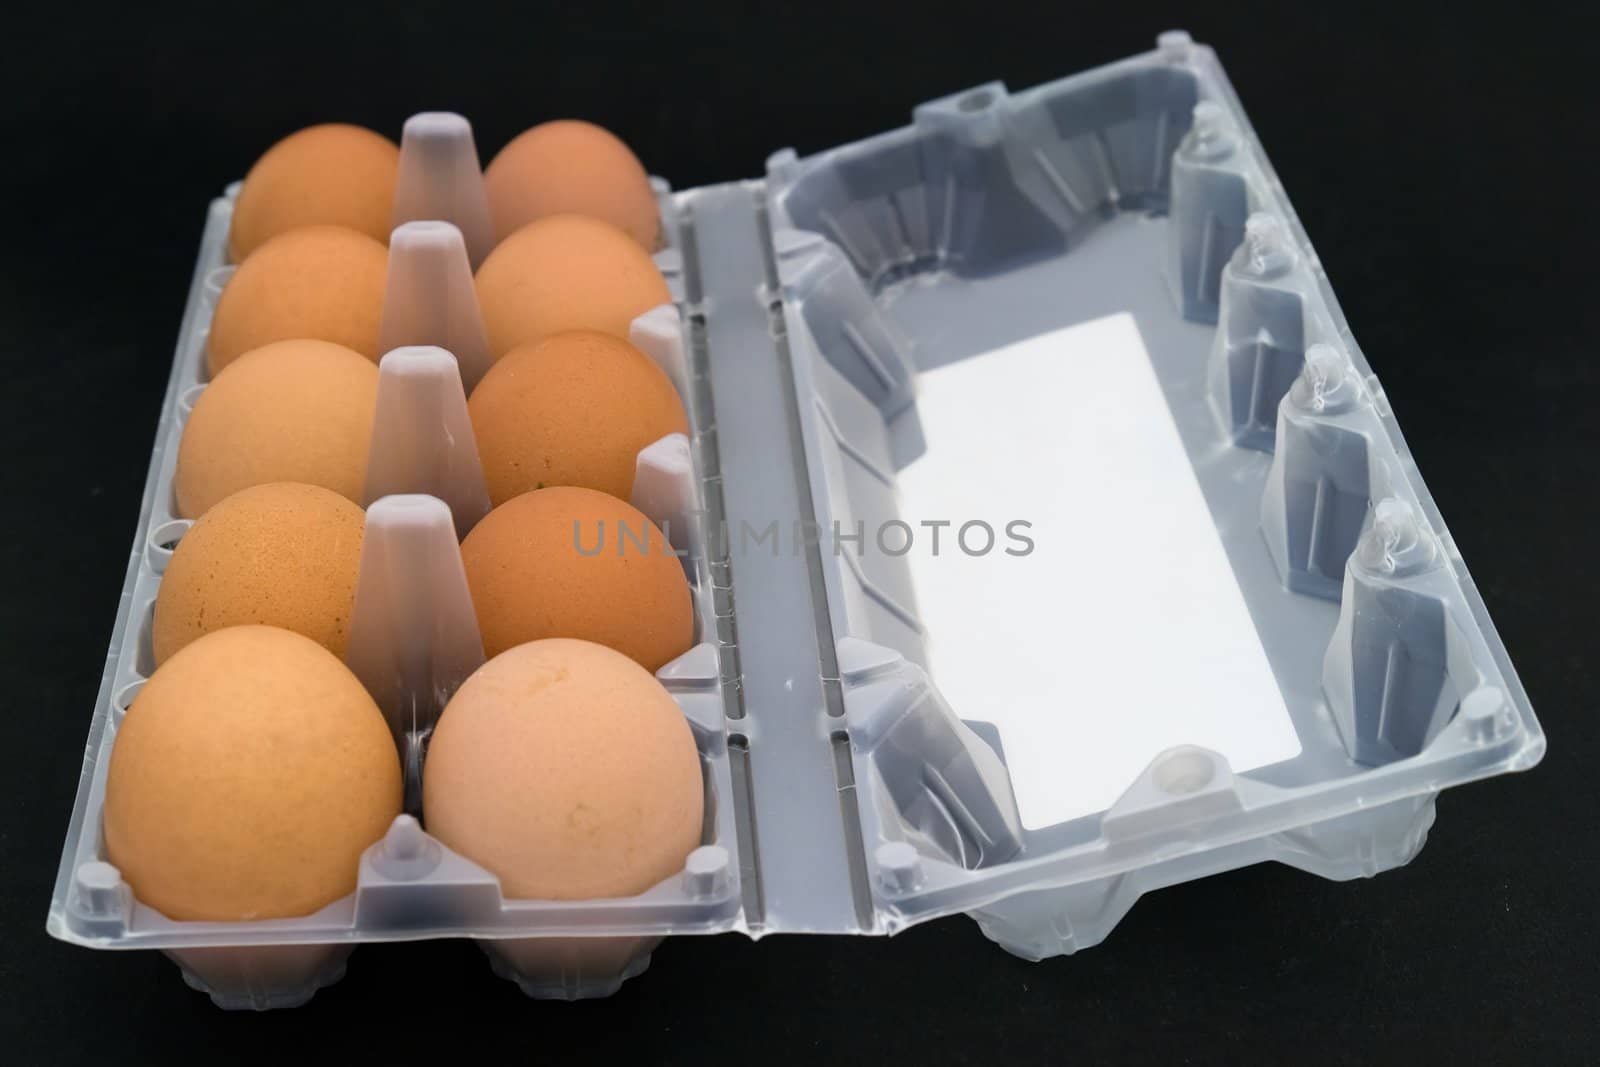 Ten eggs in packing by stepanov